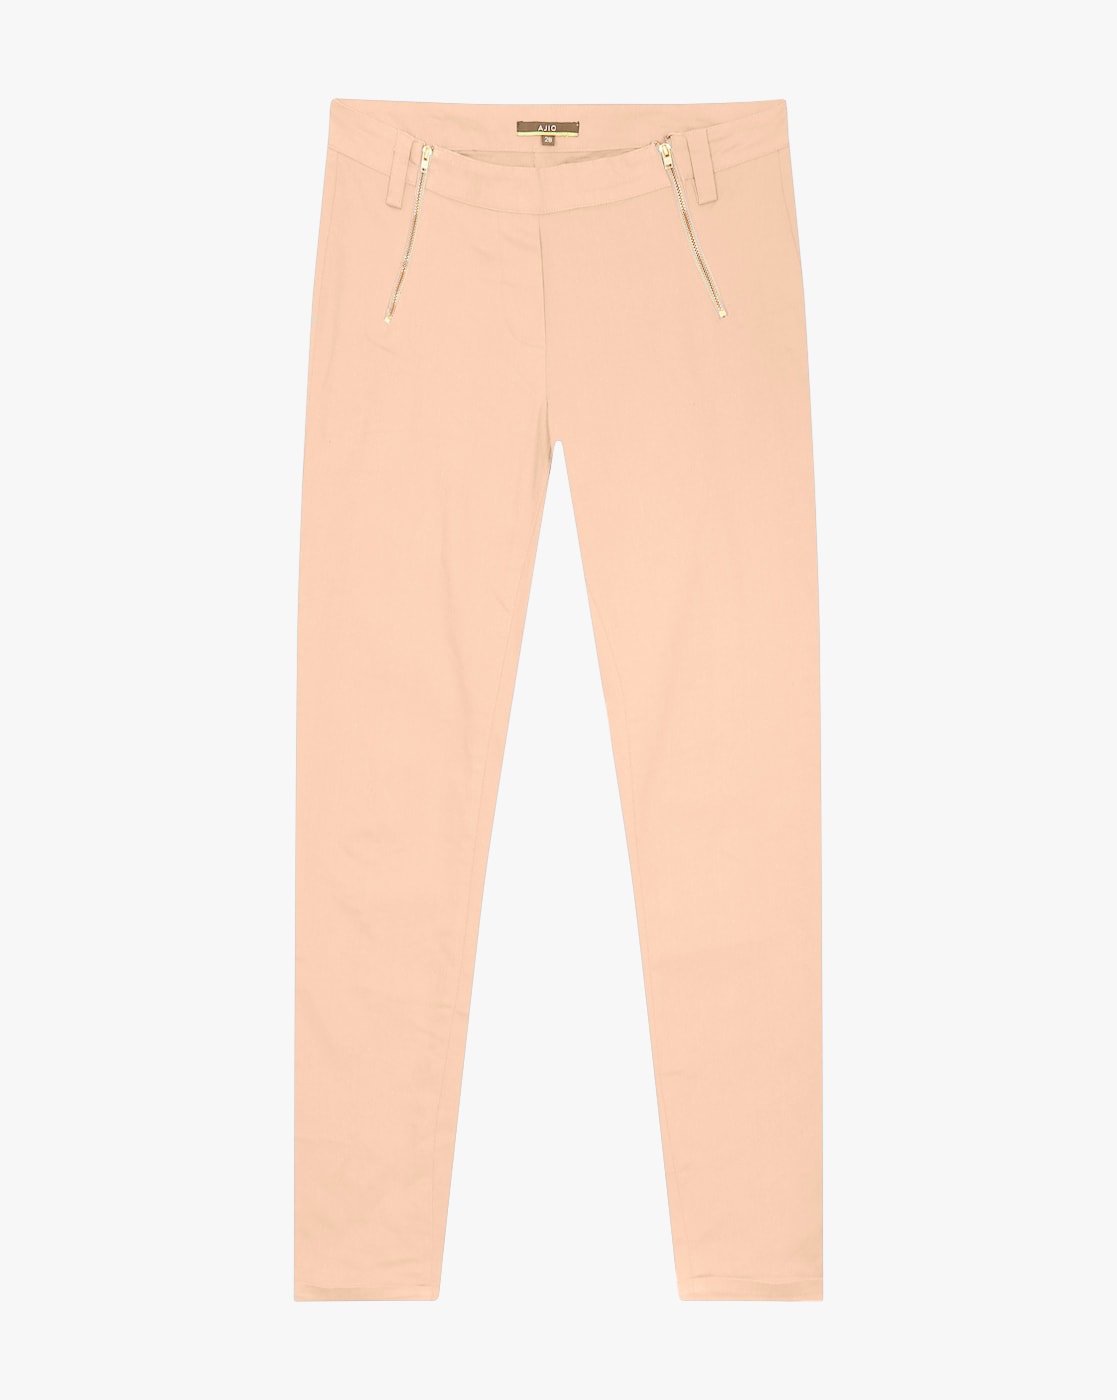 Buy Olive Trousers & Pants for Men by HENCE Online | Ajio.com